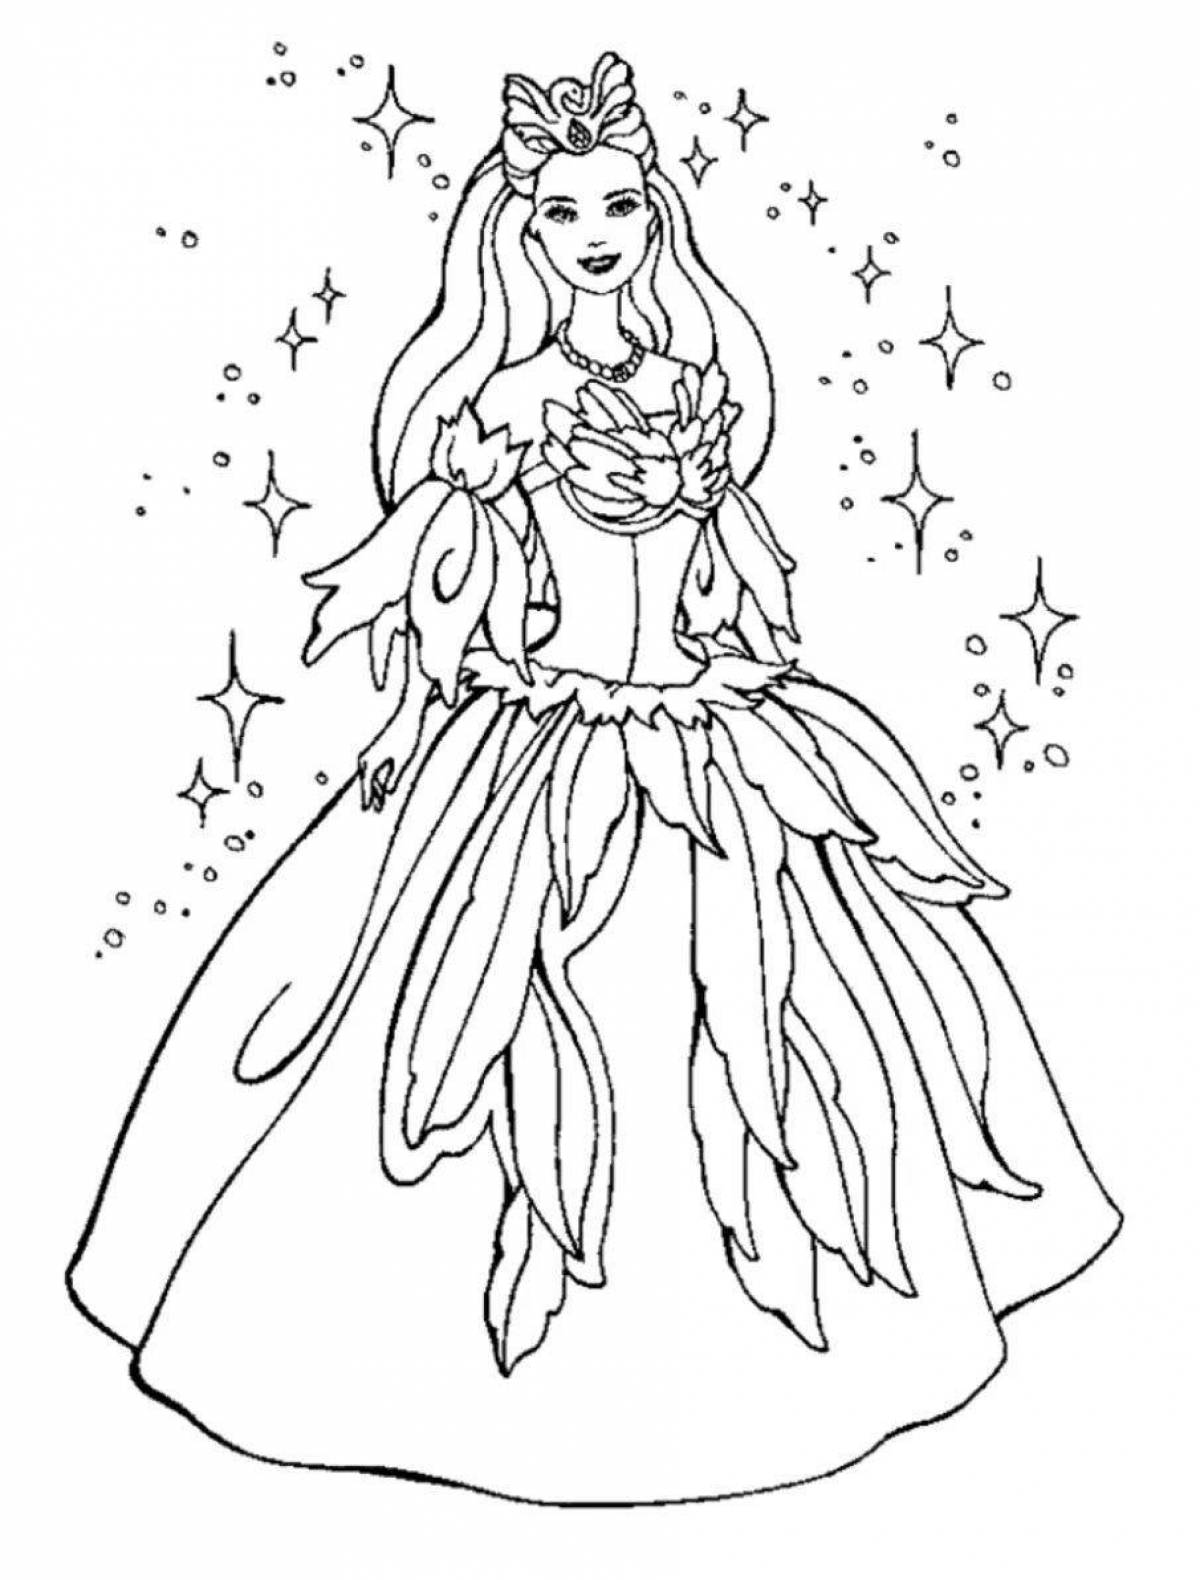 Awesome queen barbie coloring page